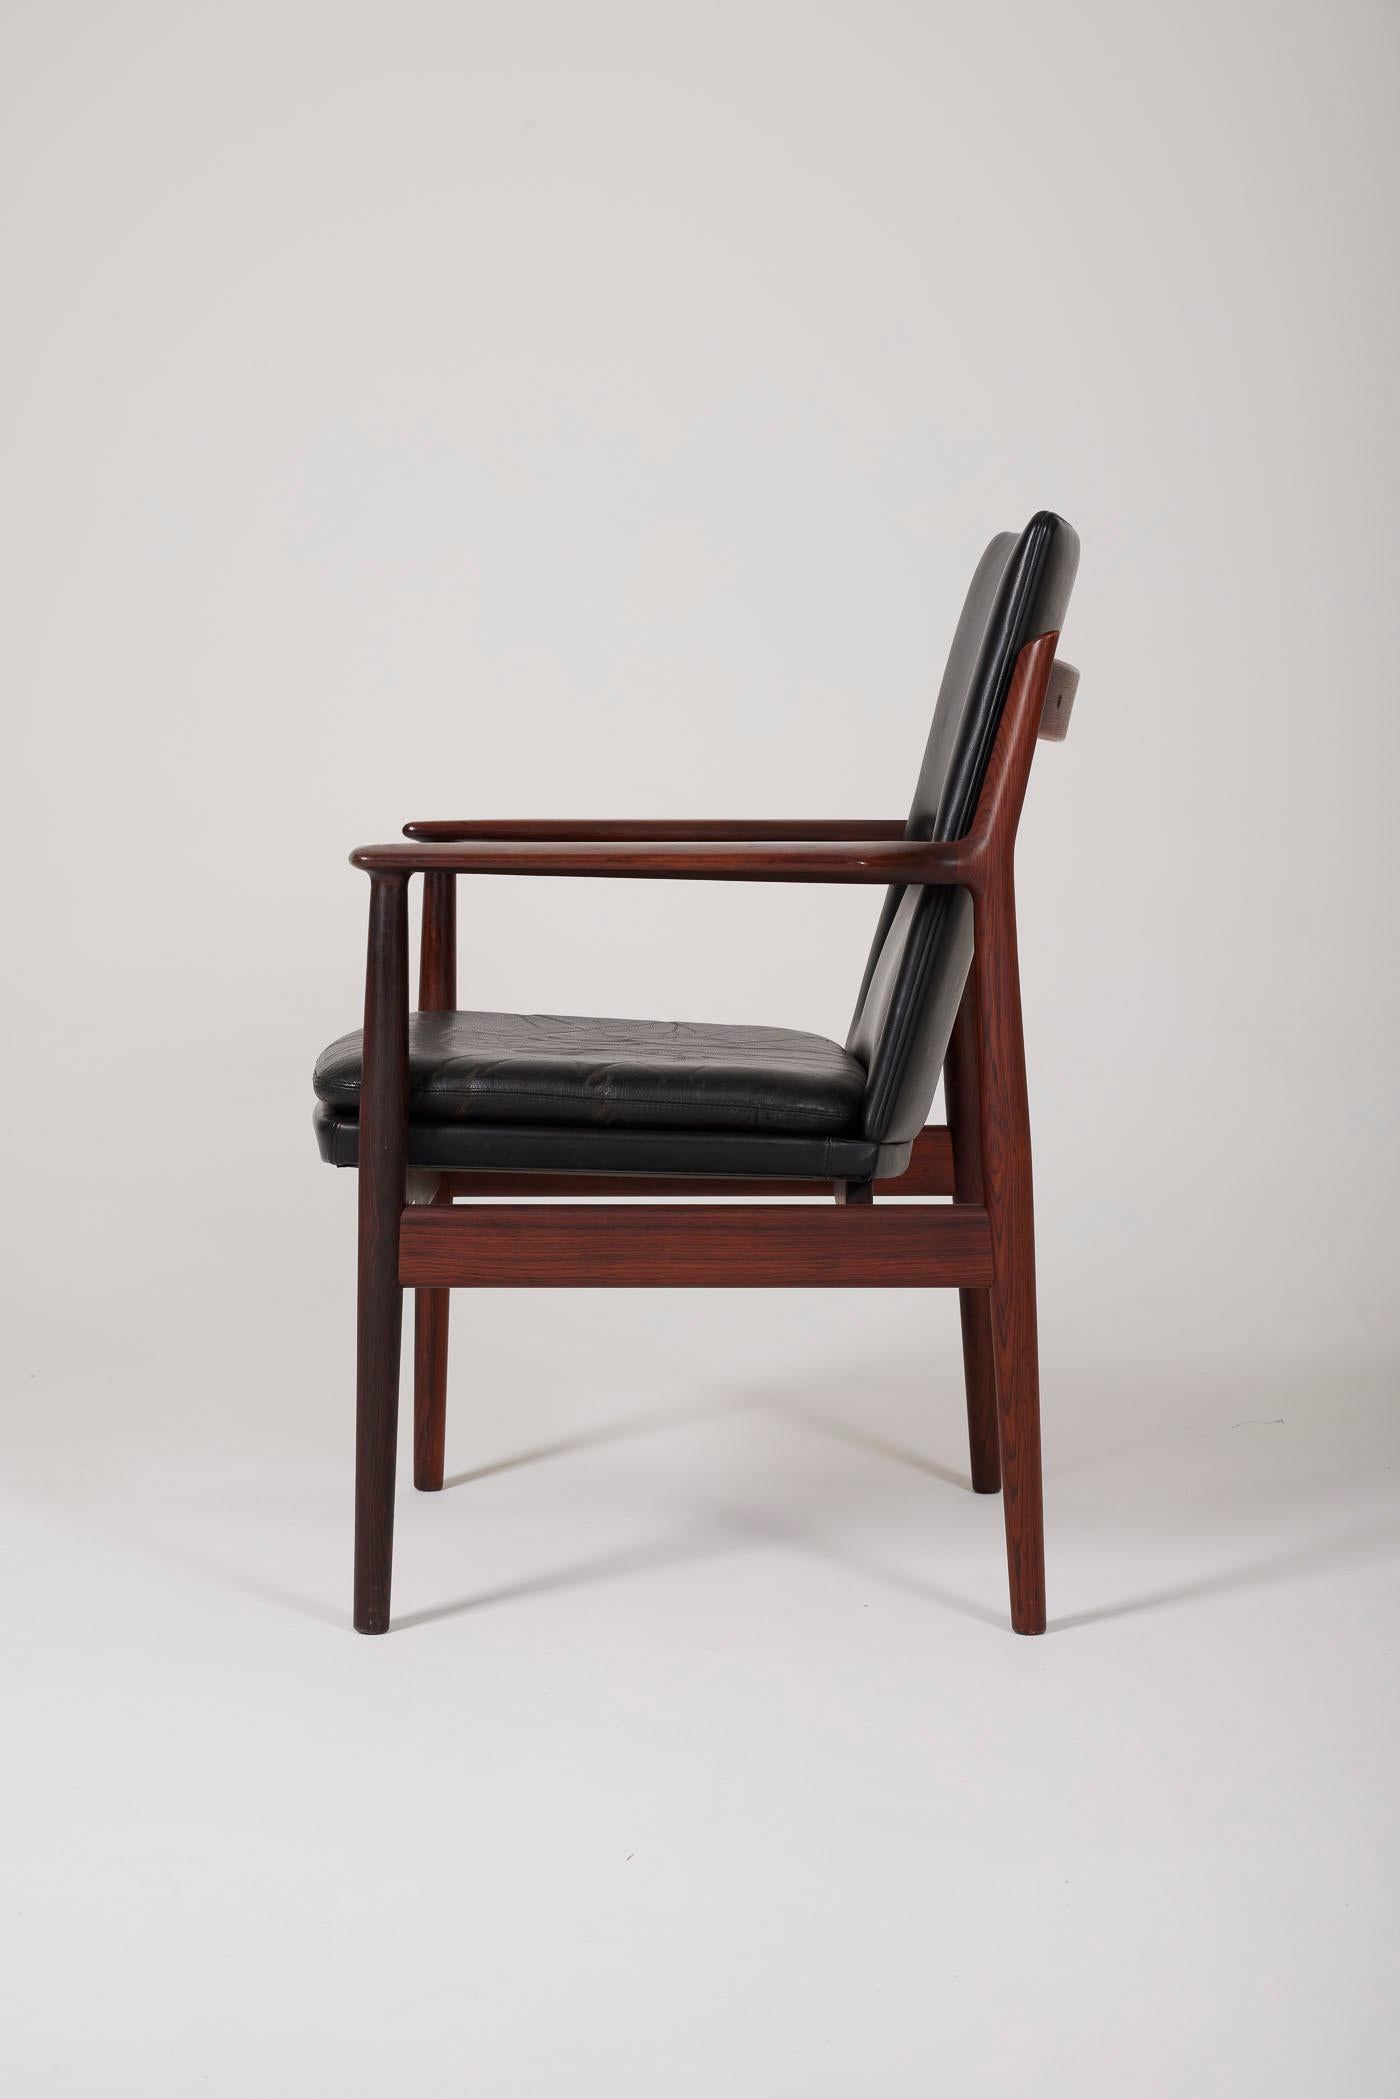 Danish rosewood vintage armchair by designer Arne Vodder (1926-2009) for Sibast Furniture, 1960s. Very good overall condition.
DV81